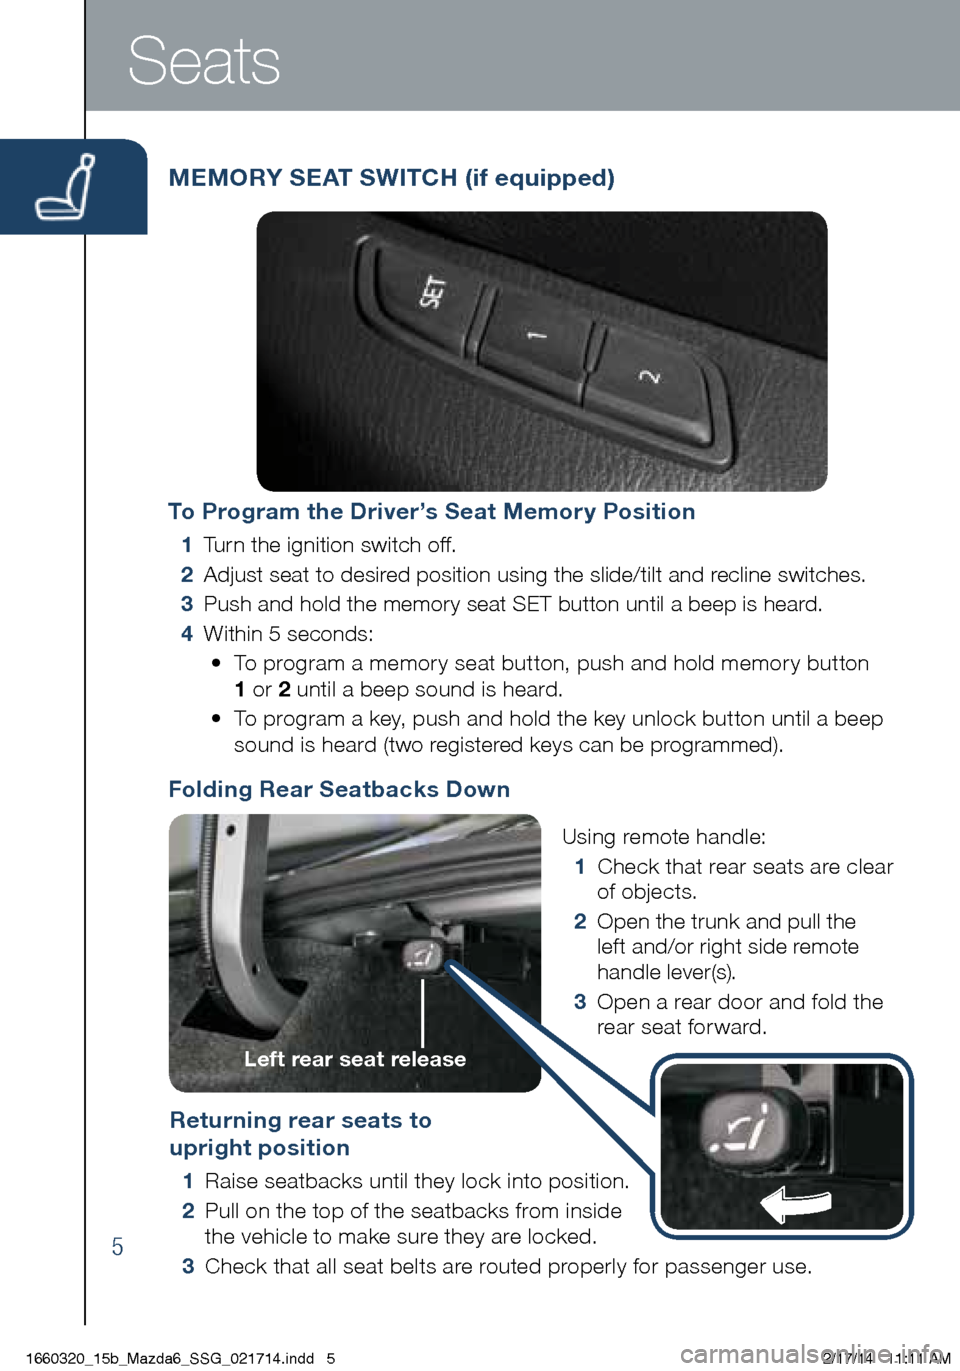 MAZDA MODEL 6 2015  Smart Start Guide (in English) 5
Folding Rear Seatbacks DownReturning rear seats to   
upright position
 1 Raise seatbacks until they lock into position.
 2   Pu

ll on the top of the seatbacks from inside 
the vehicle to make sure